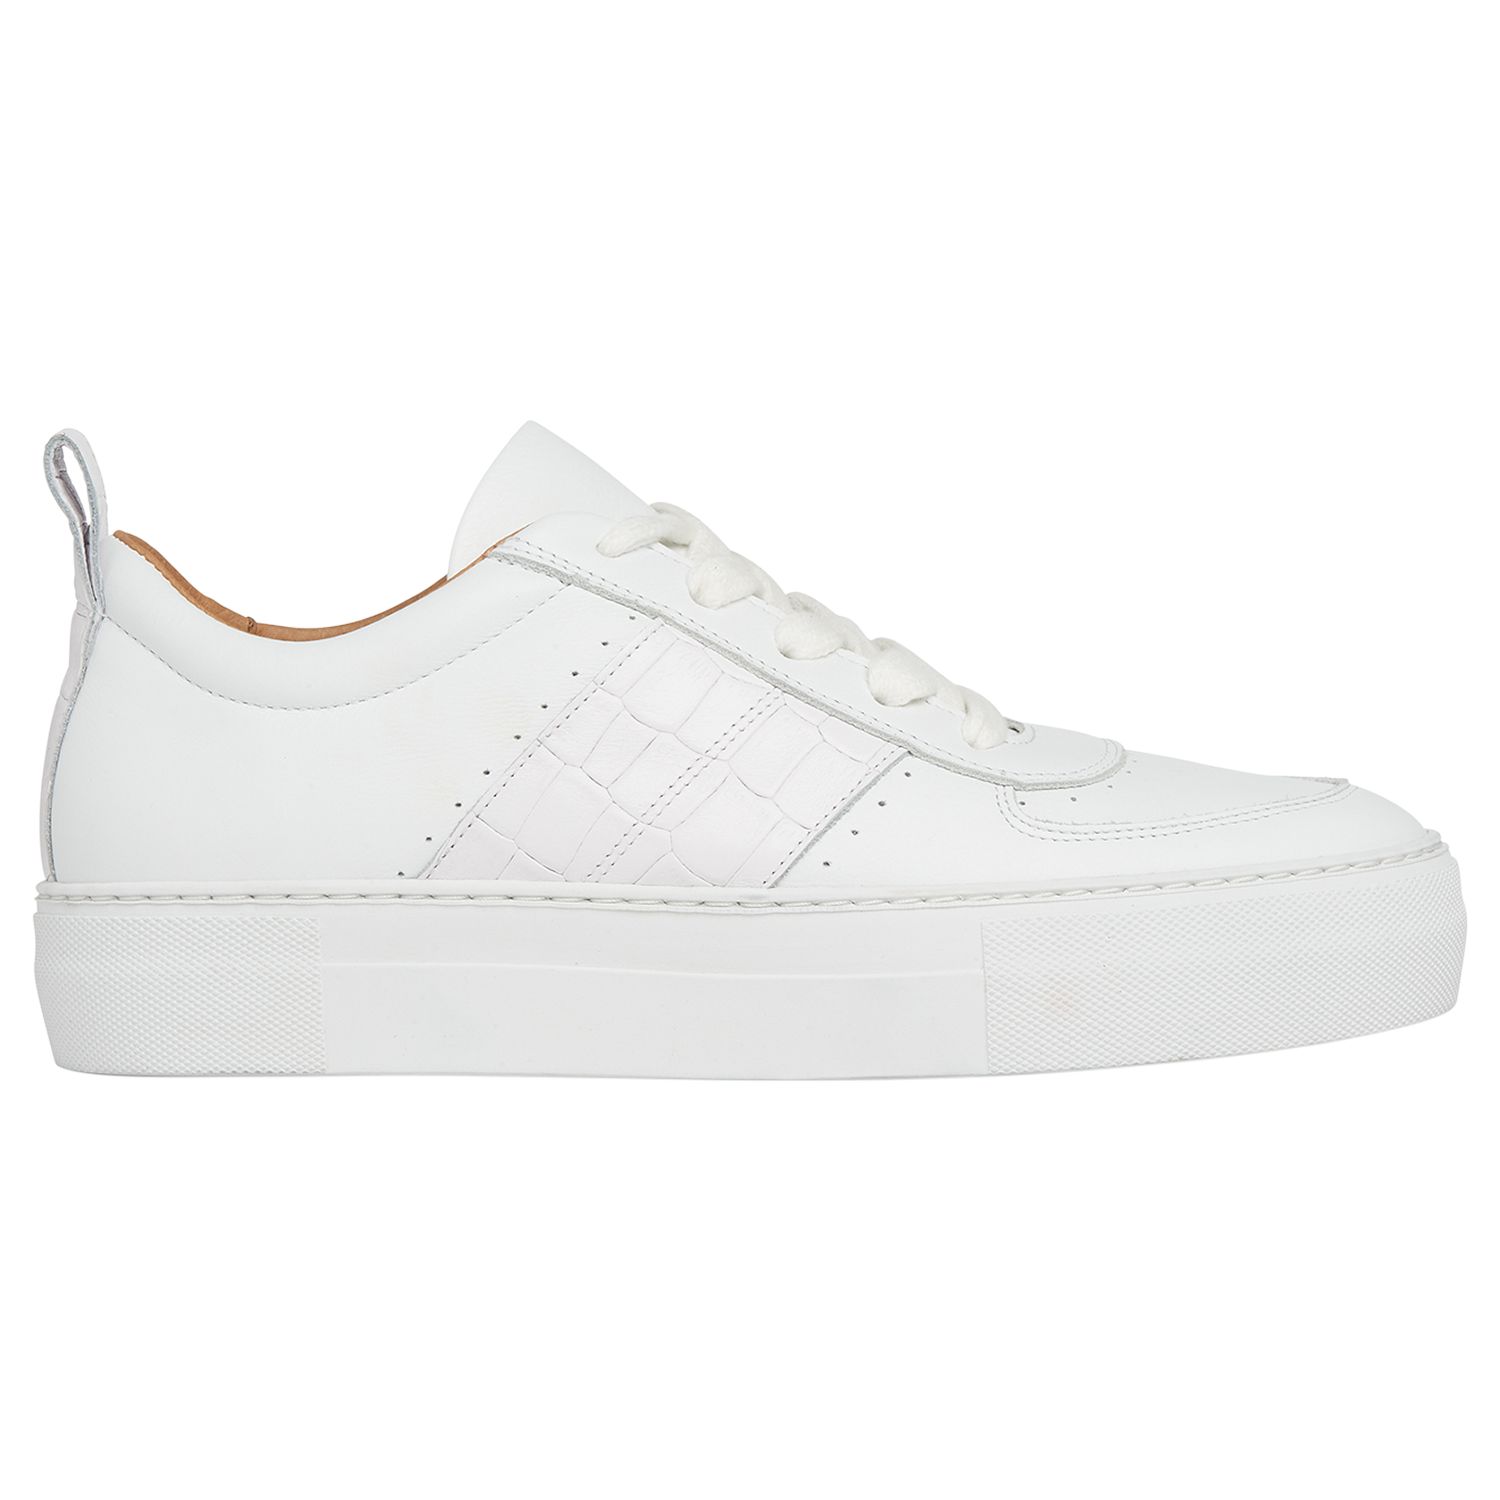 Whistles Anna Lace Up Trainers, White Leather, 8